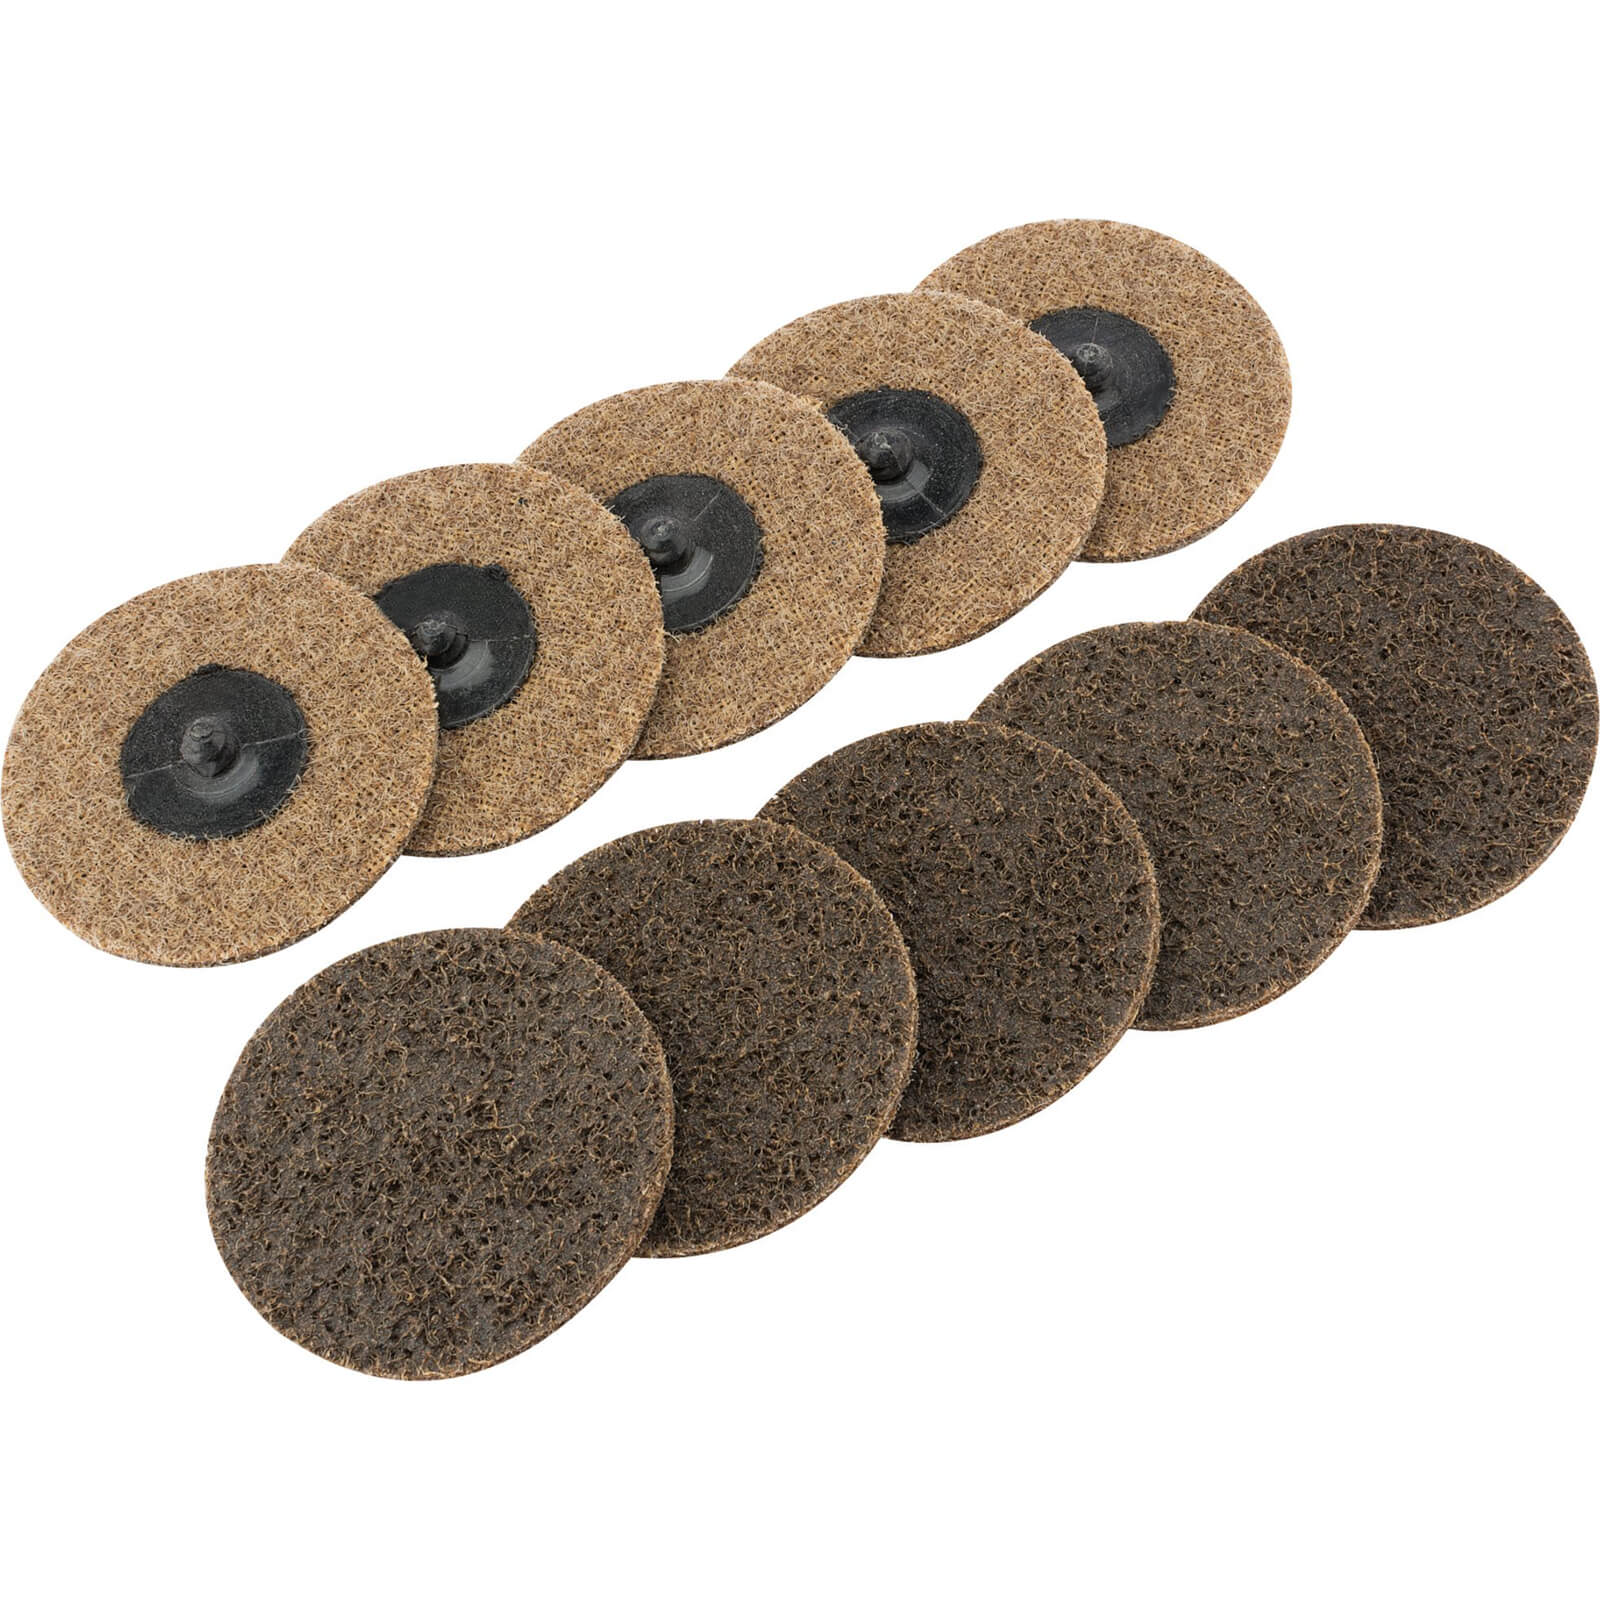 Image of Draper Polycarbide Abrasive Pad Disc 75mm 75mm Coarse Pack of 10